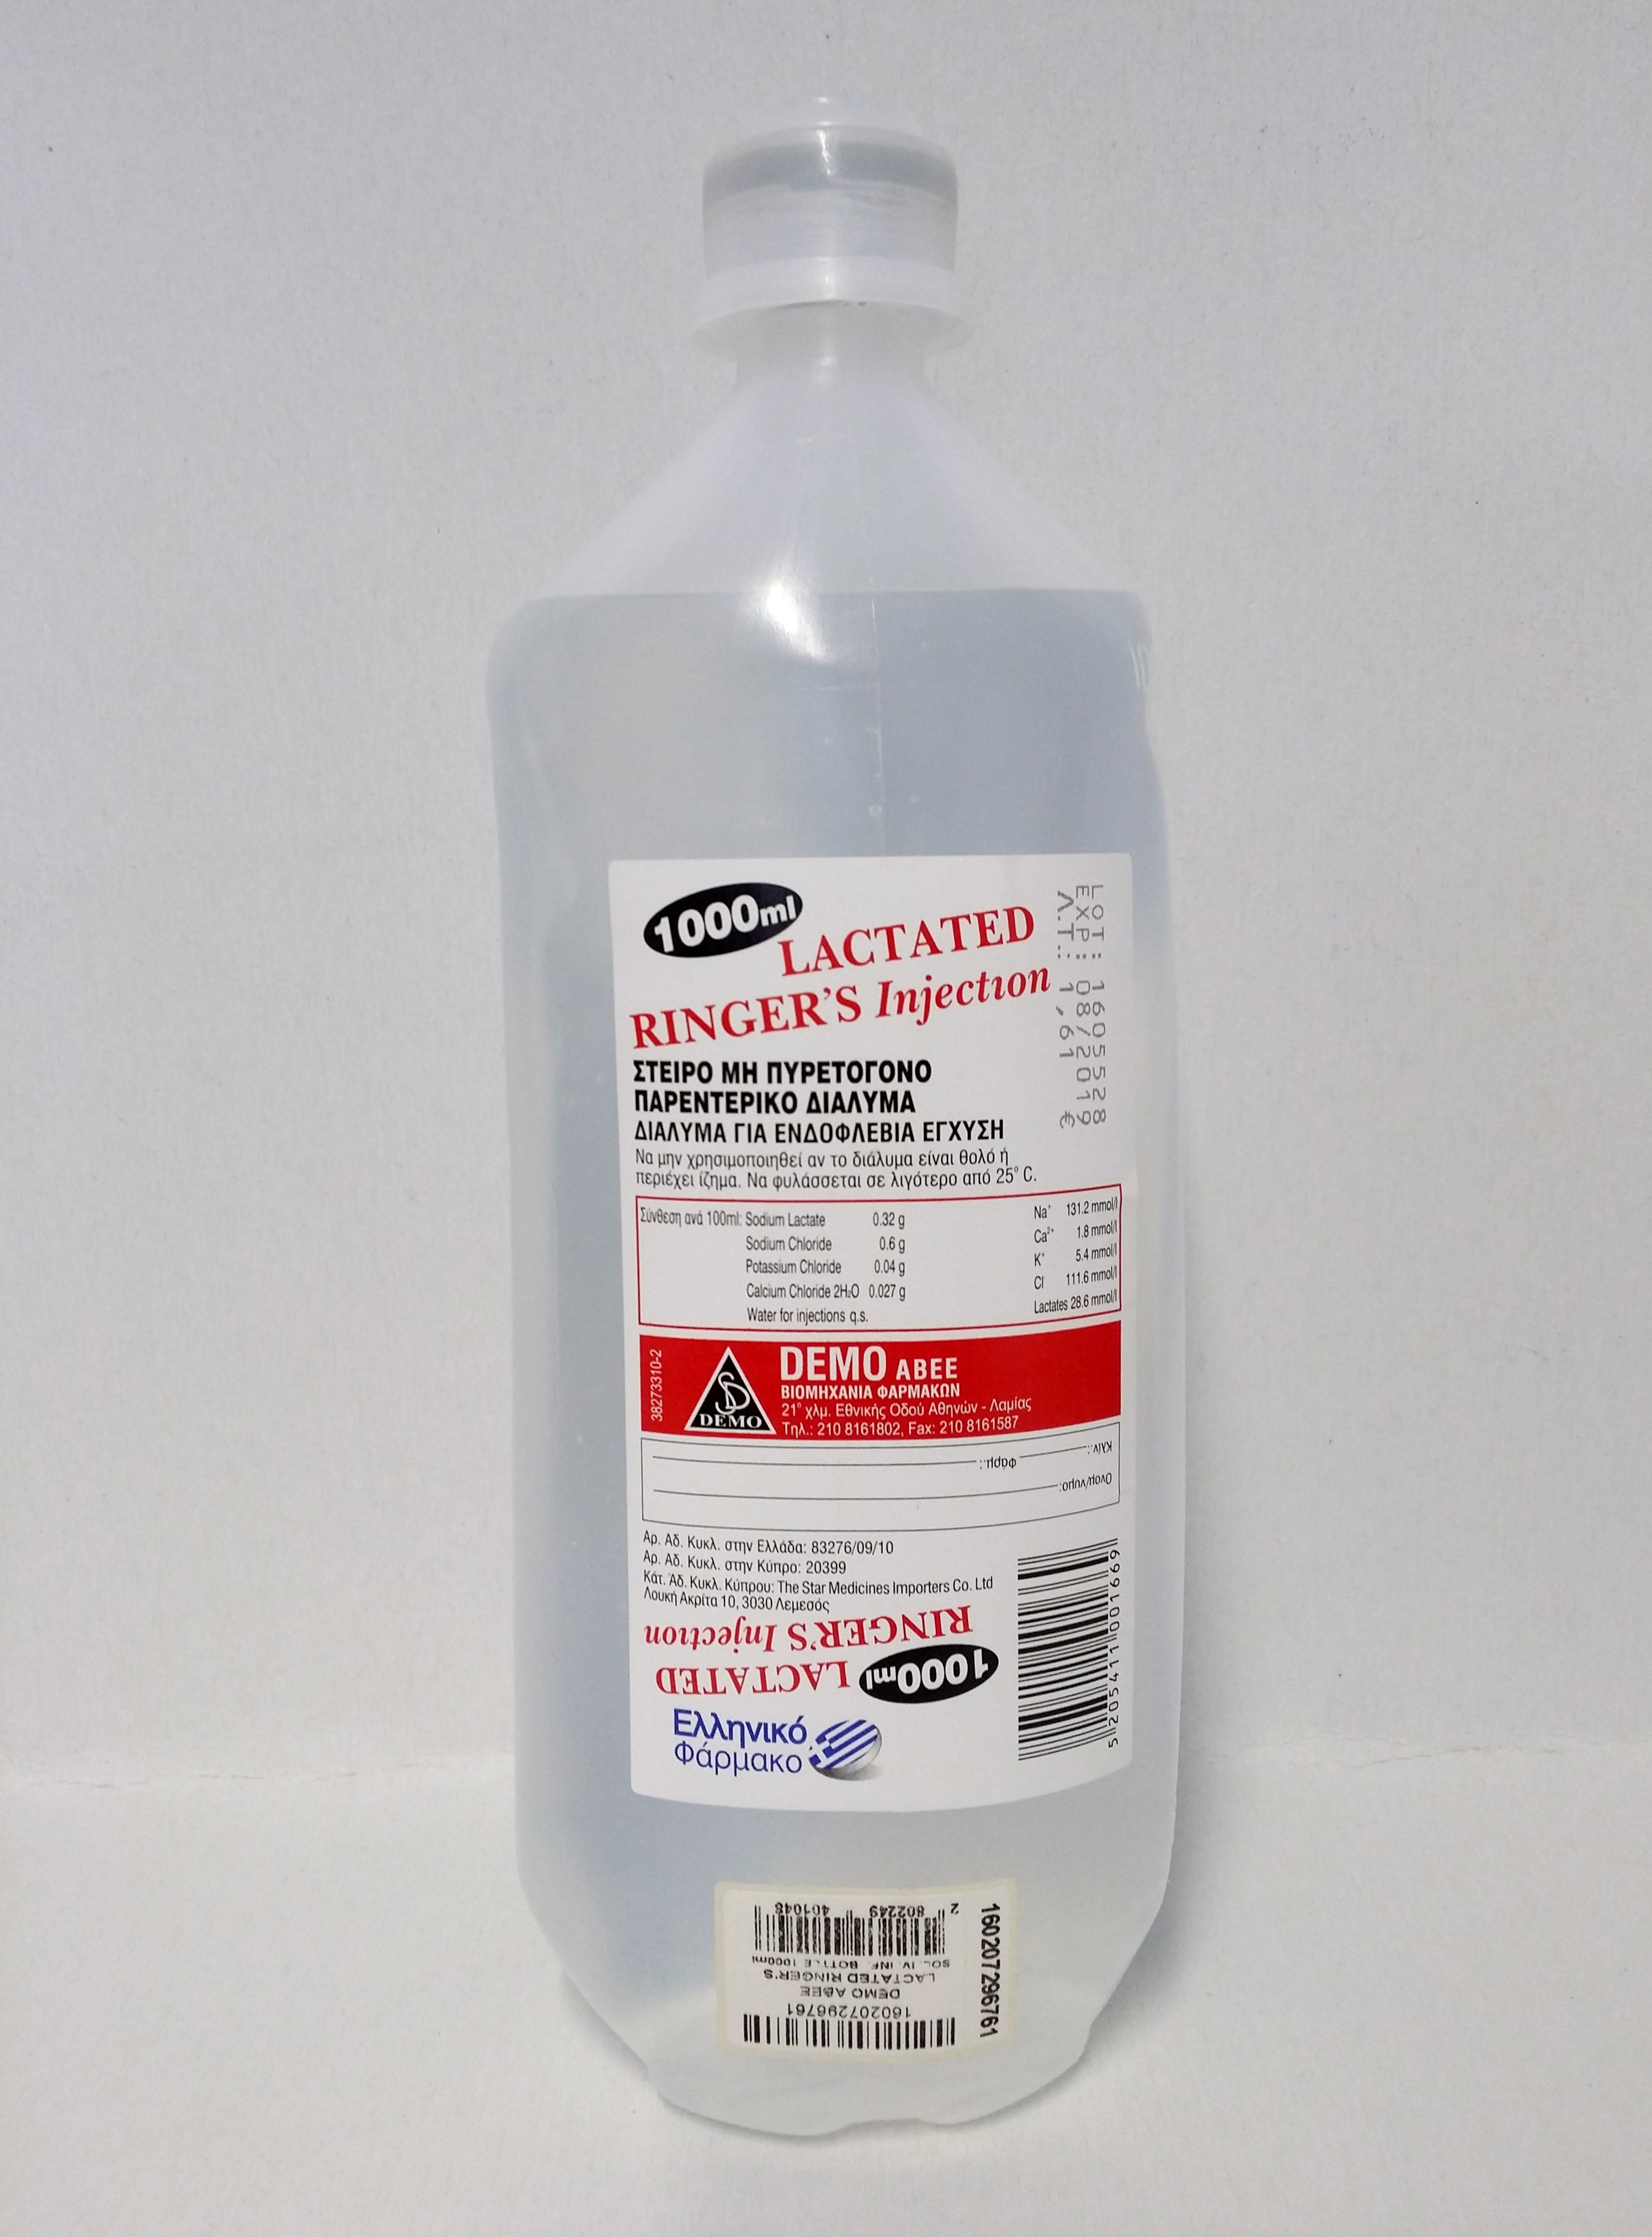 Lactated ringers, 1000 ml